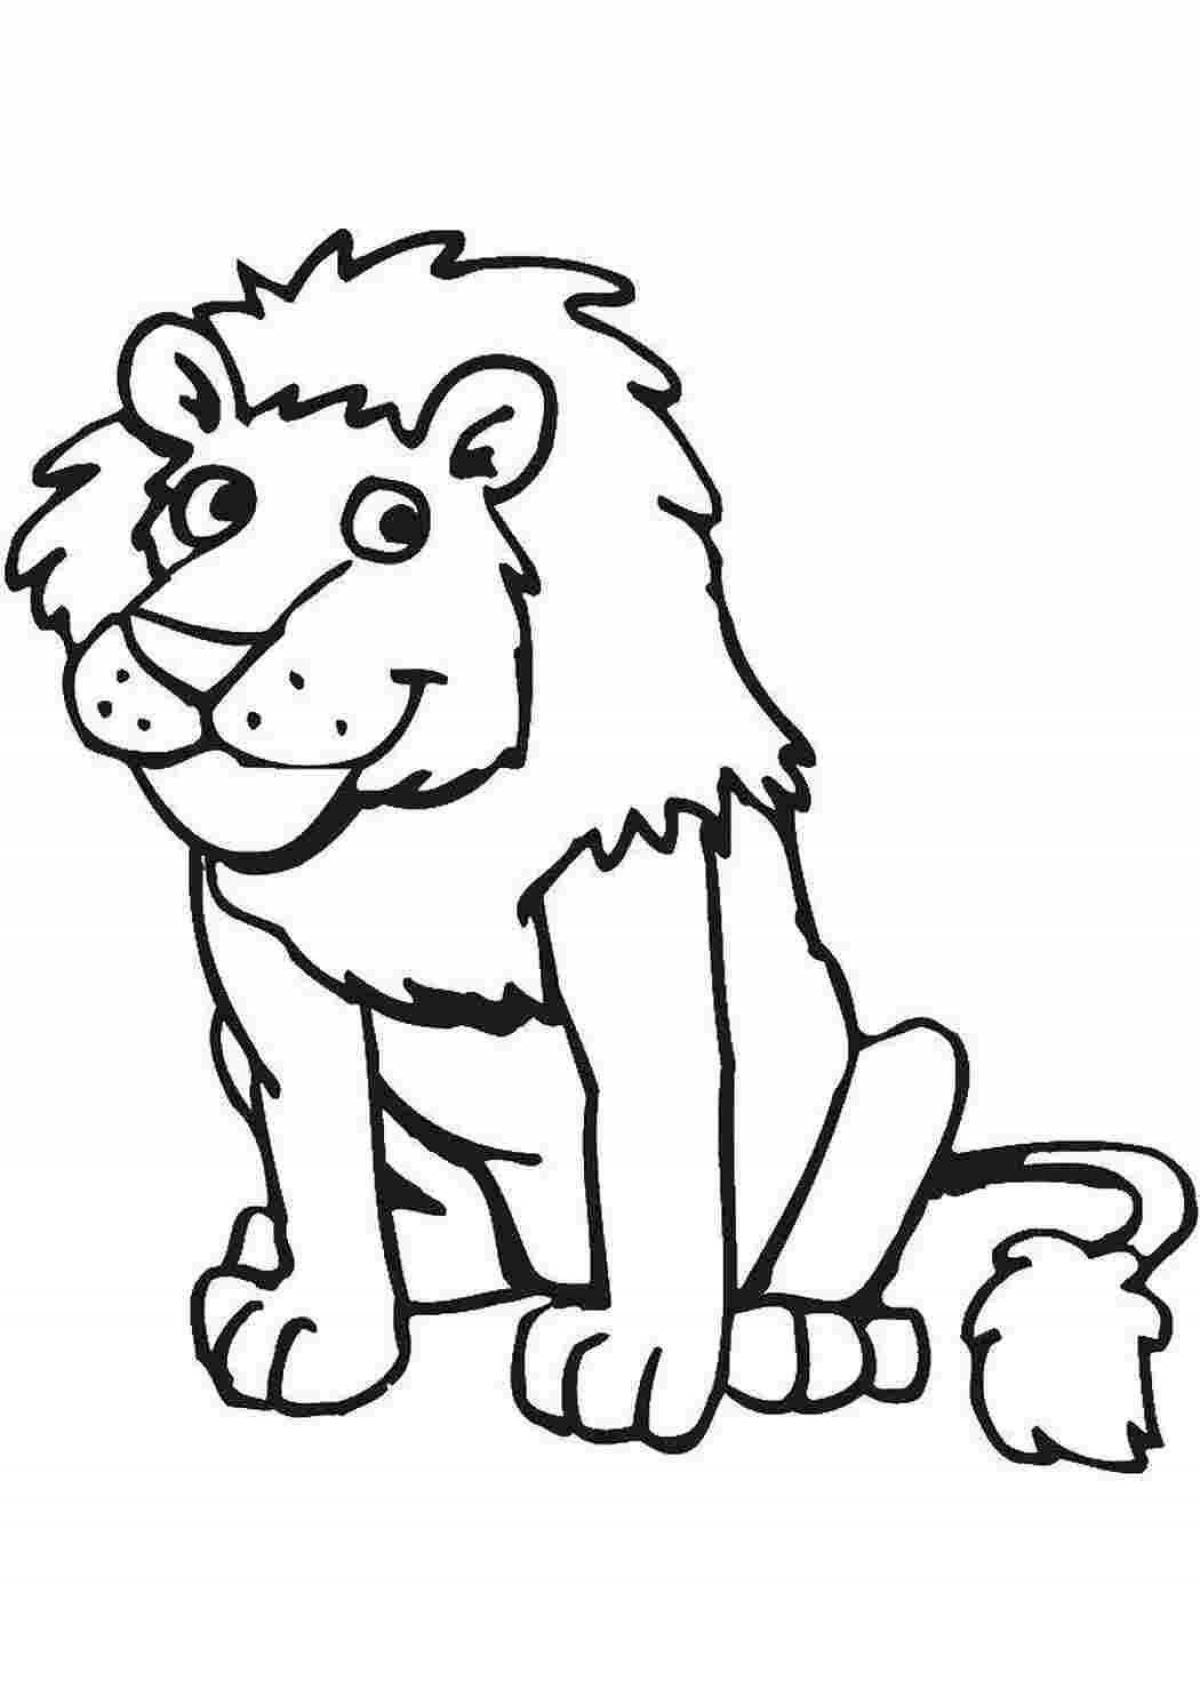 Coloring book bright lion for children 6-7 years old